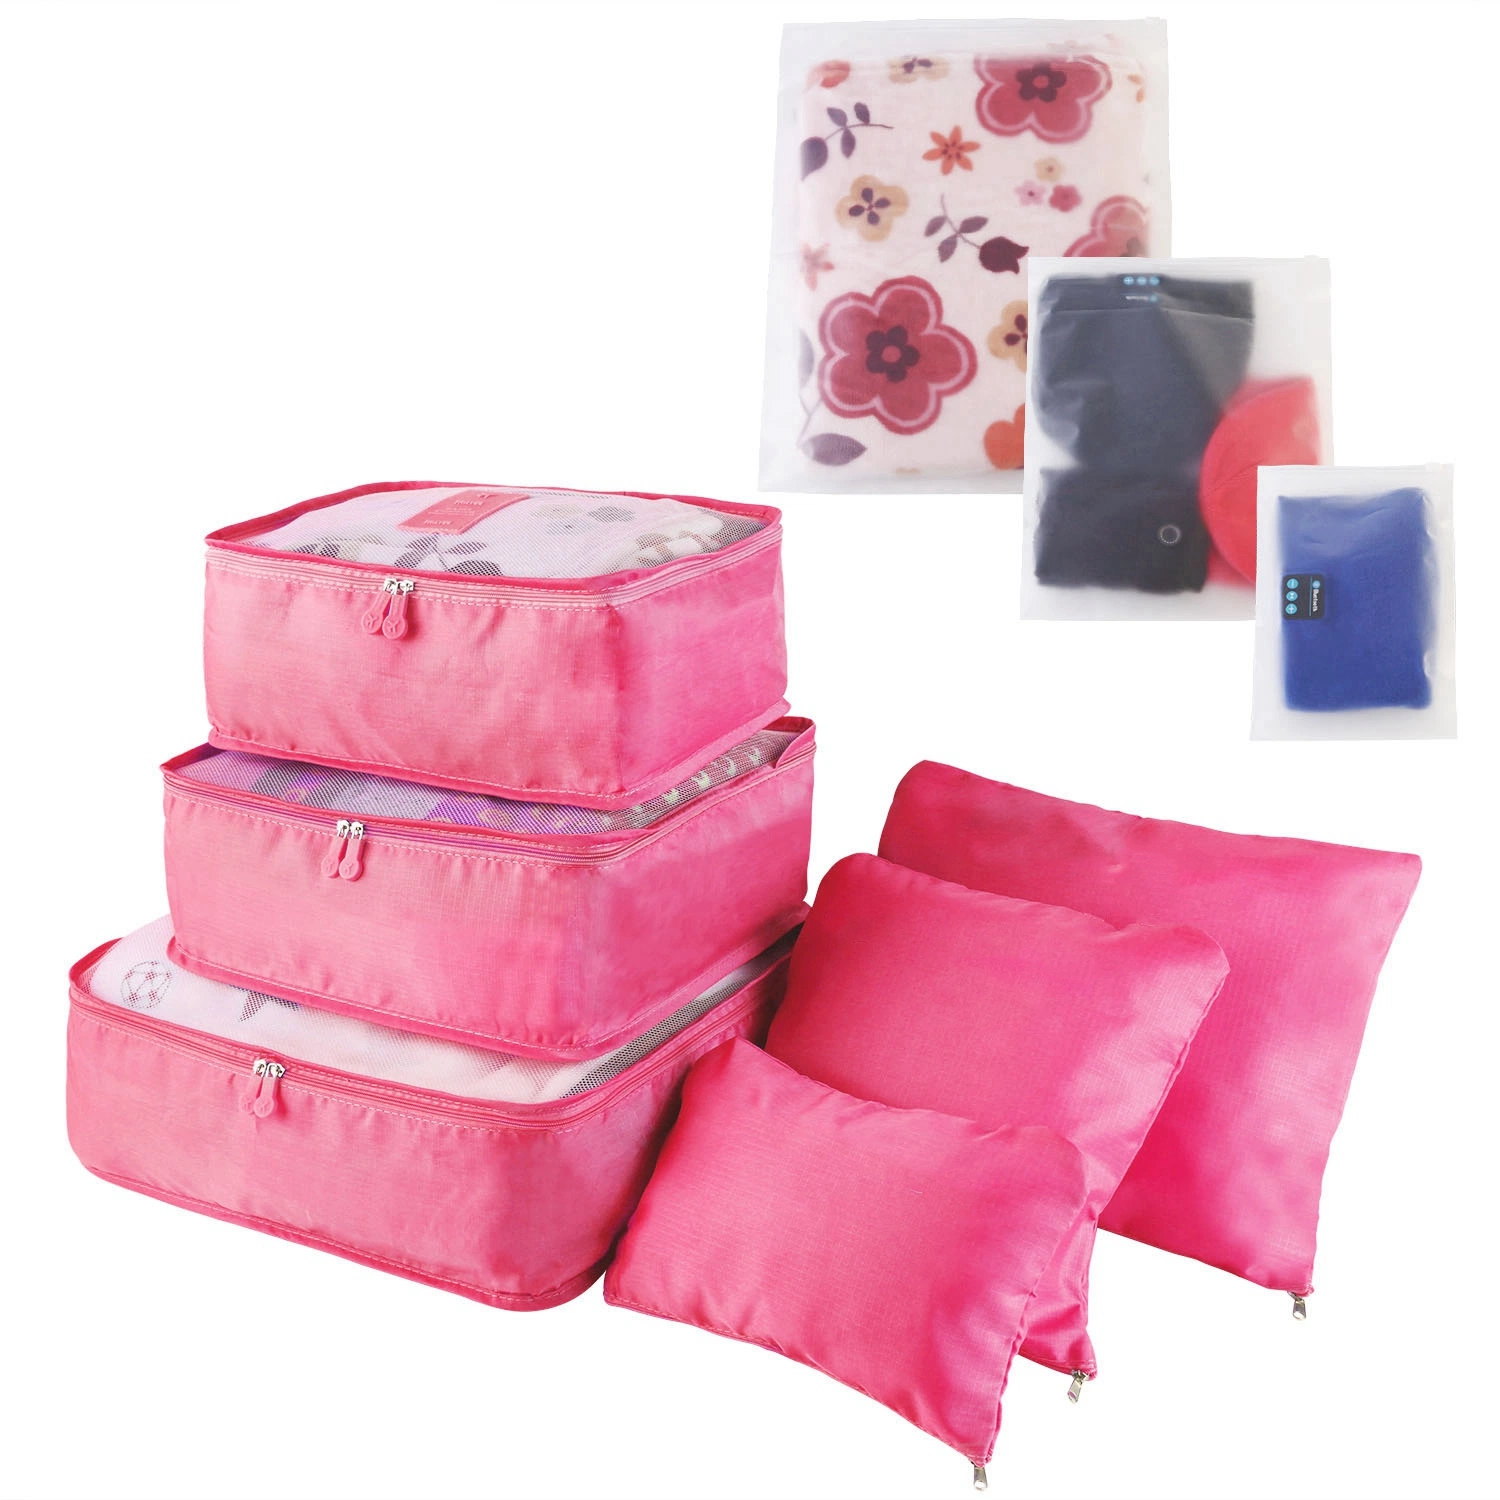 Branded 9Pcs Clothes Storage Bags Water-Resistant Travel Luggage Organizer Clothing Packing Cubes Hot Pink